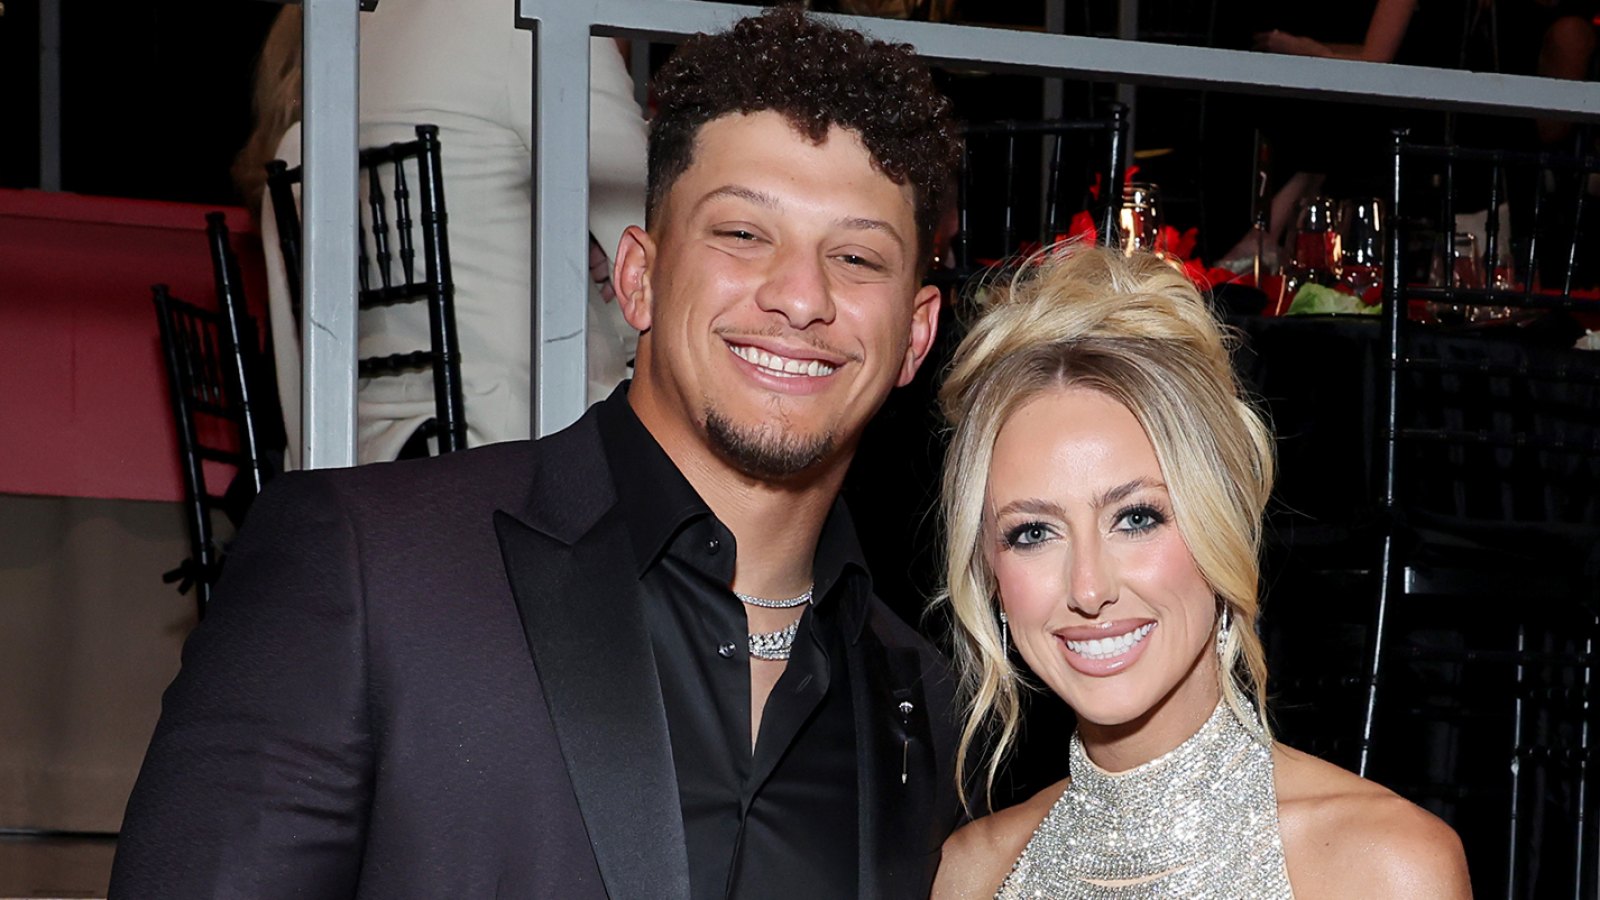 Patrick Mahomes Kisses Wife Brittany Mahomes on the Cheek During Romantic Boat Ride in Portugal